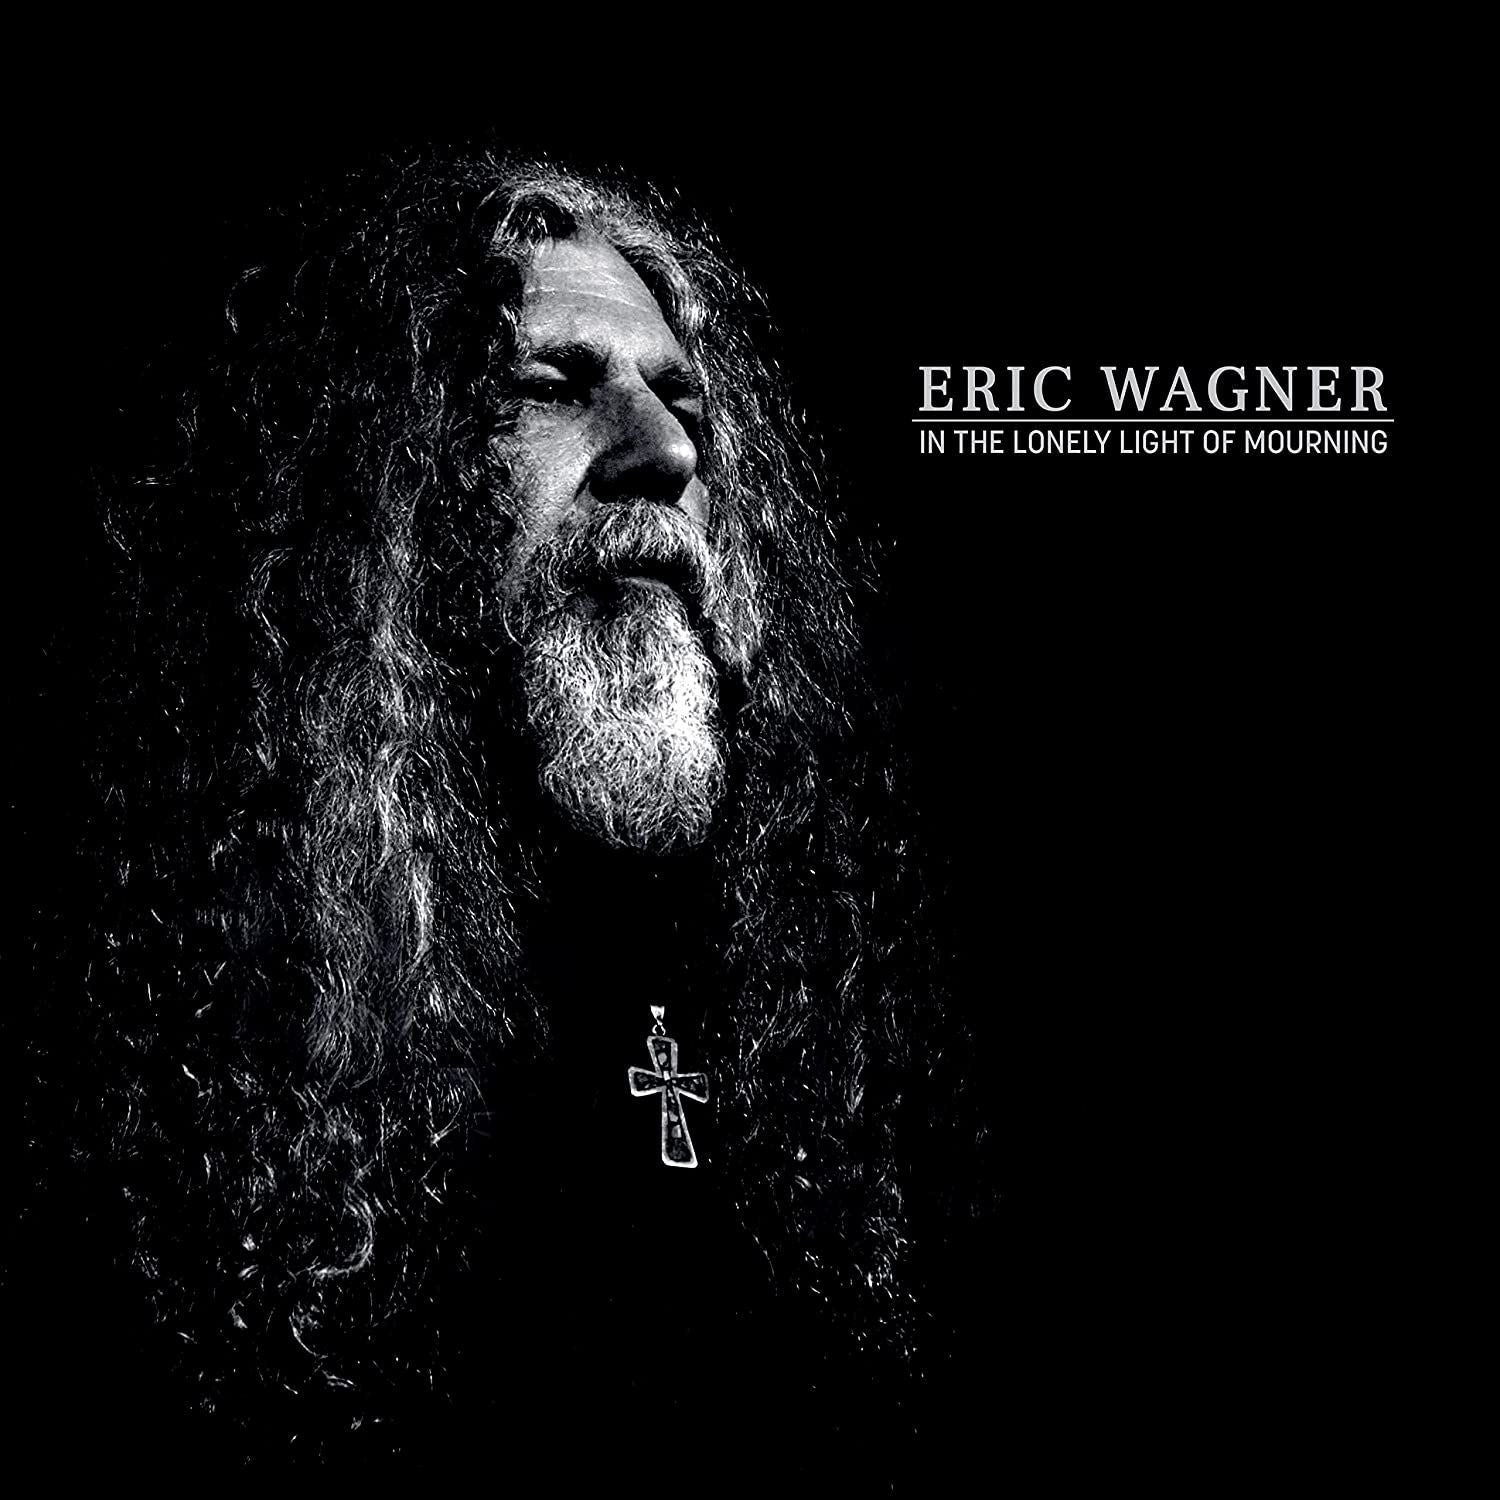 Wagner, Eric - In The Lonely Light Of Mourning - CD - New